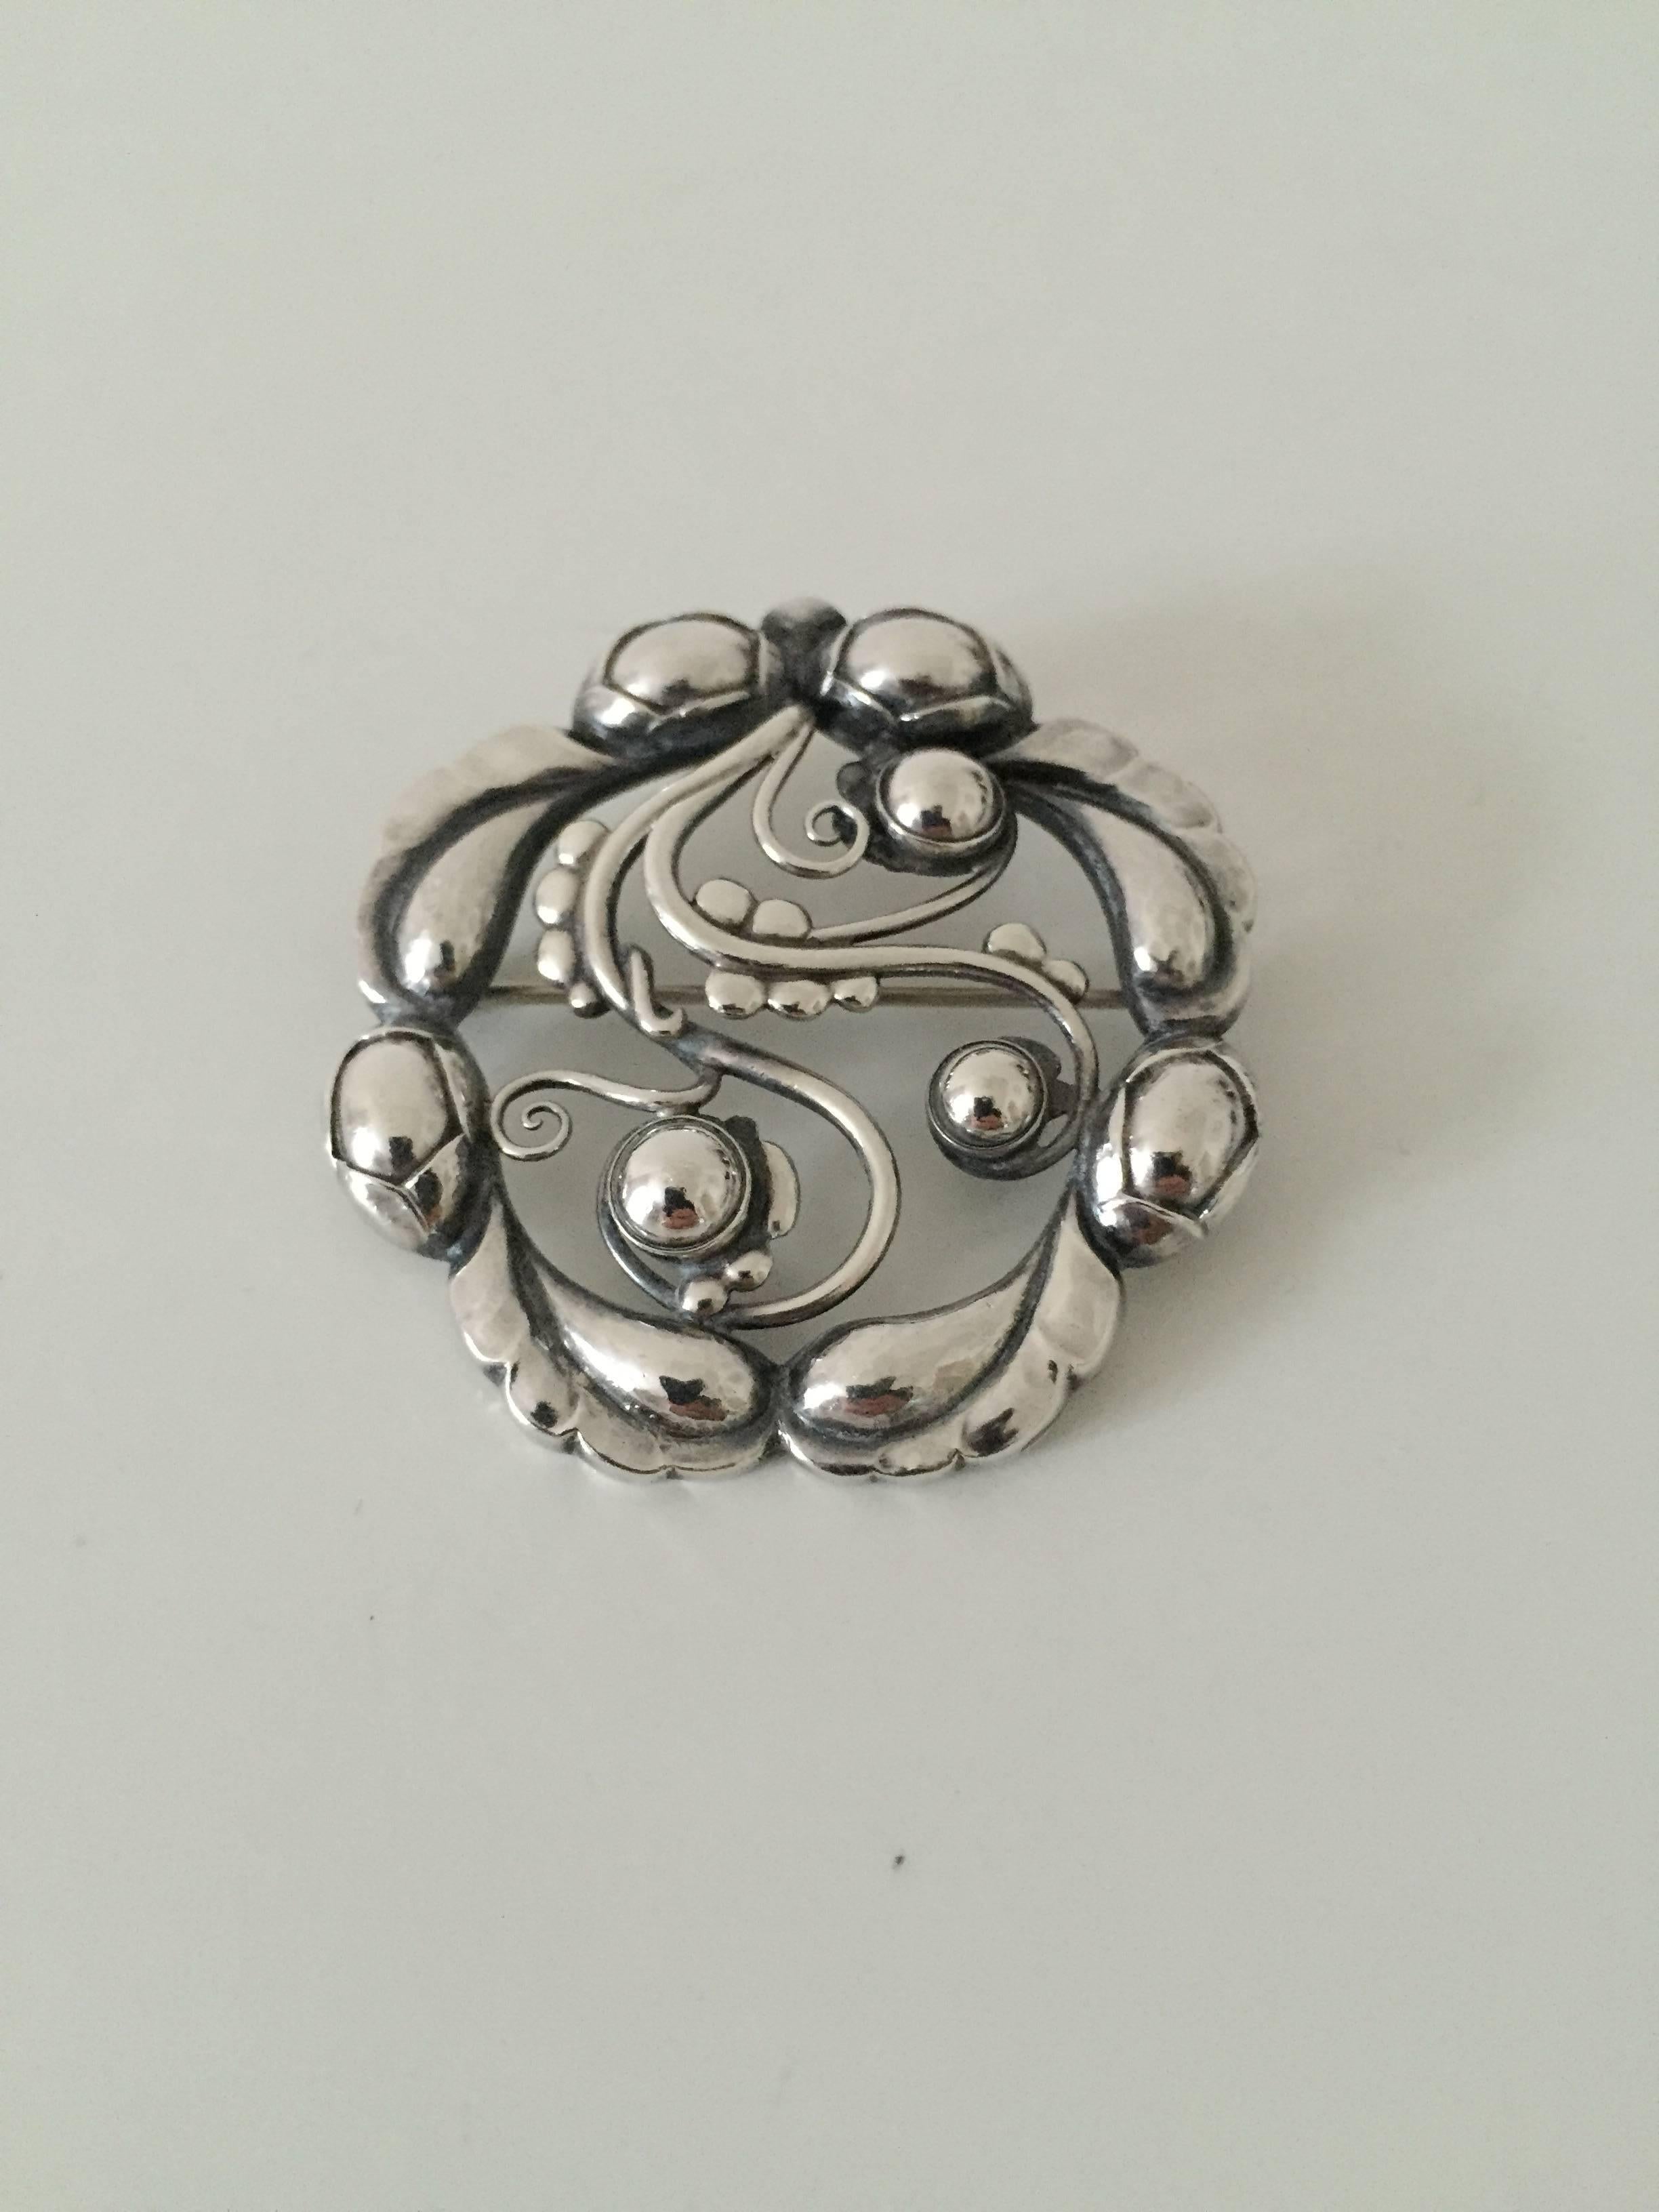 Georg Jensen sterling silver brooch #159. Made with old marks. 

Measures 4.8 cm (1 9/10